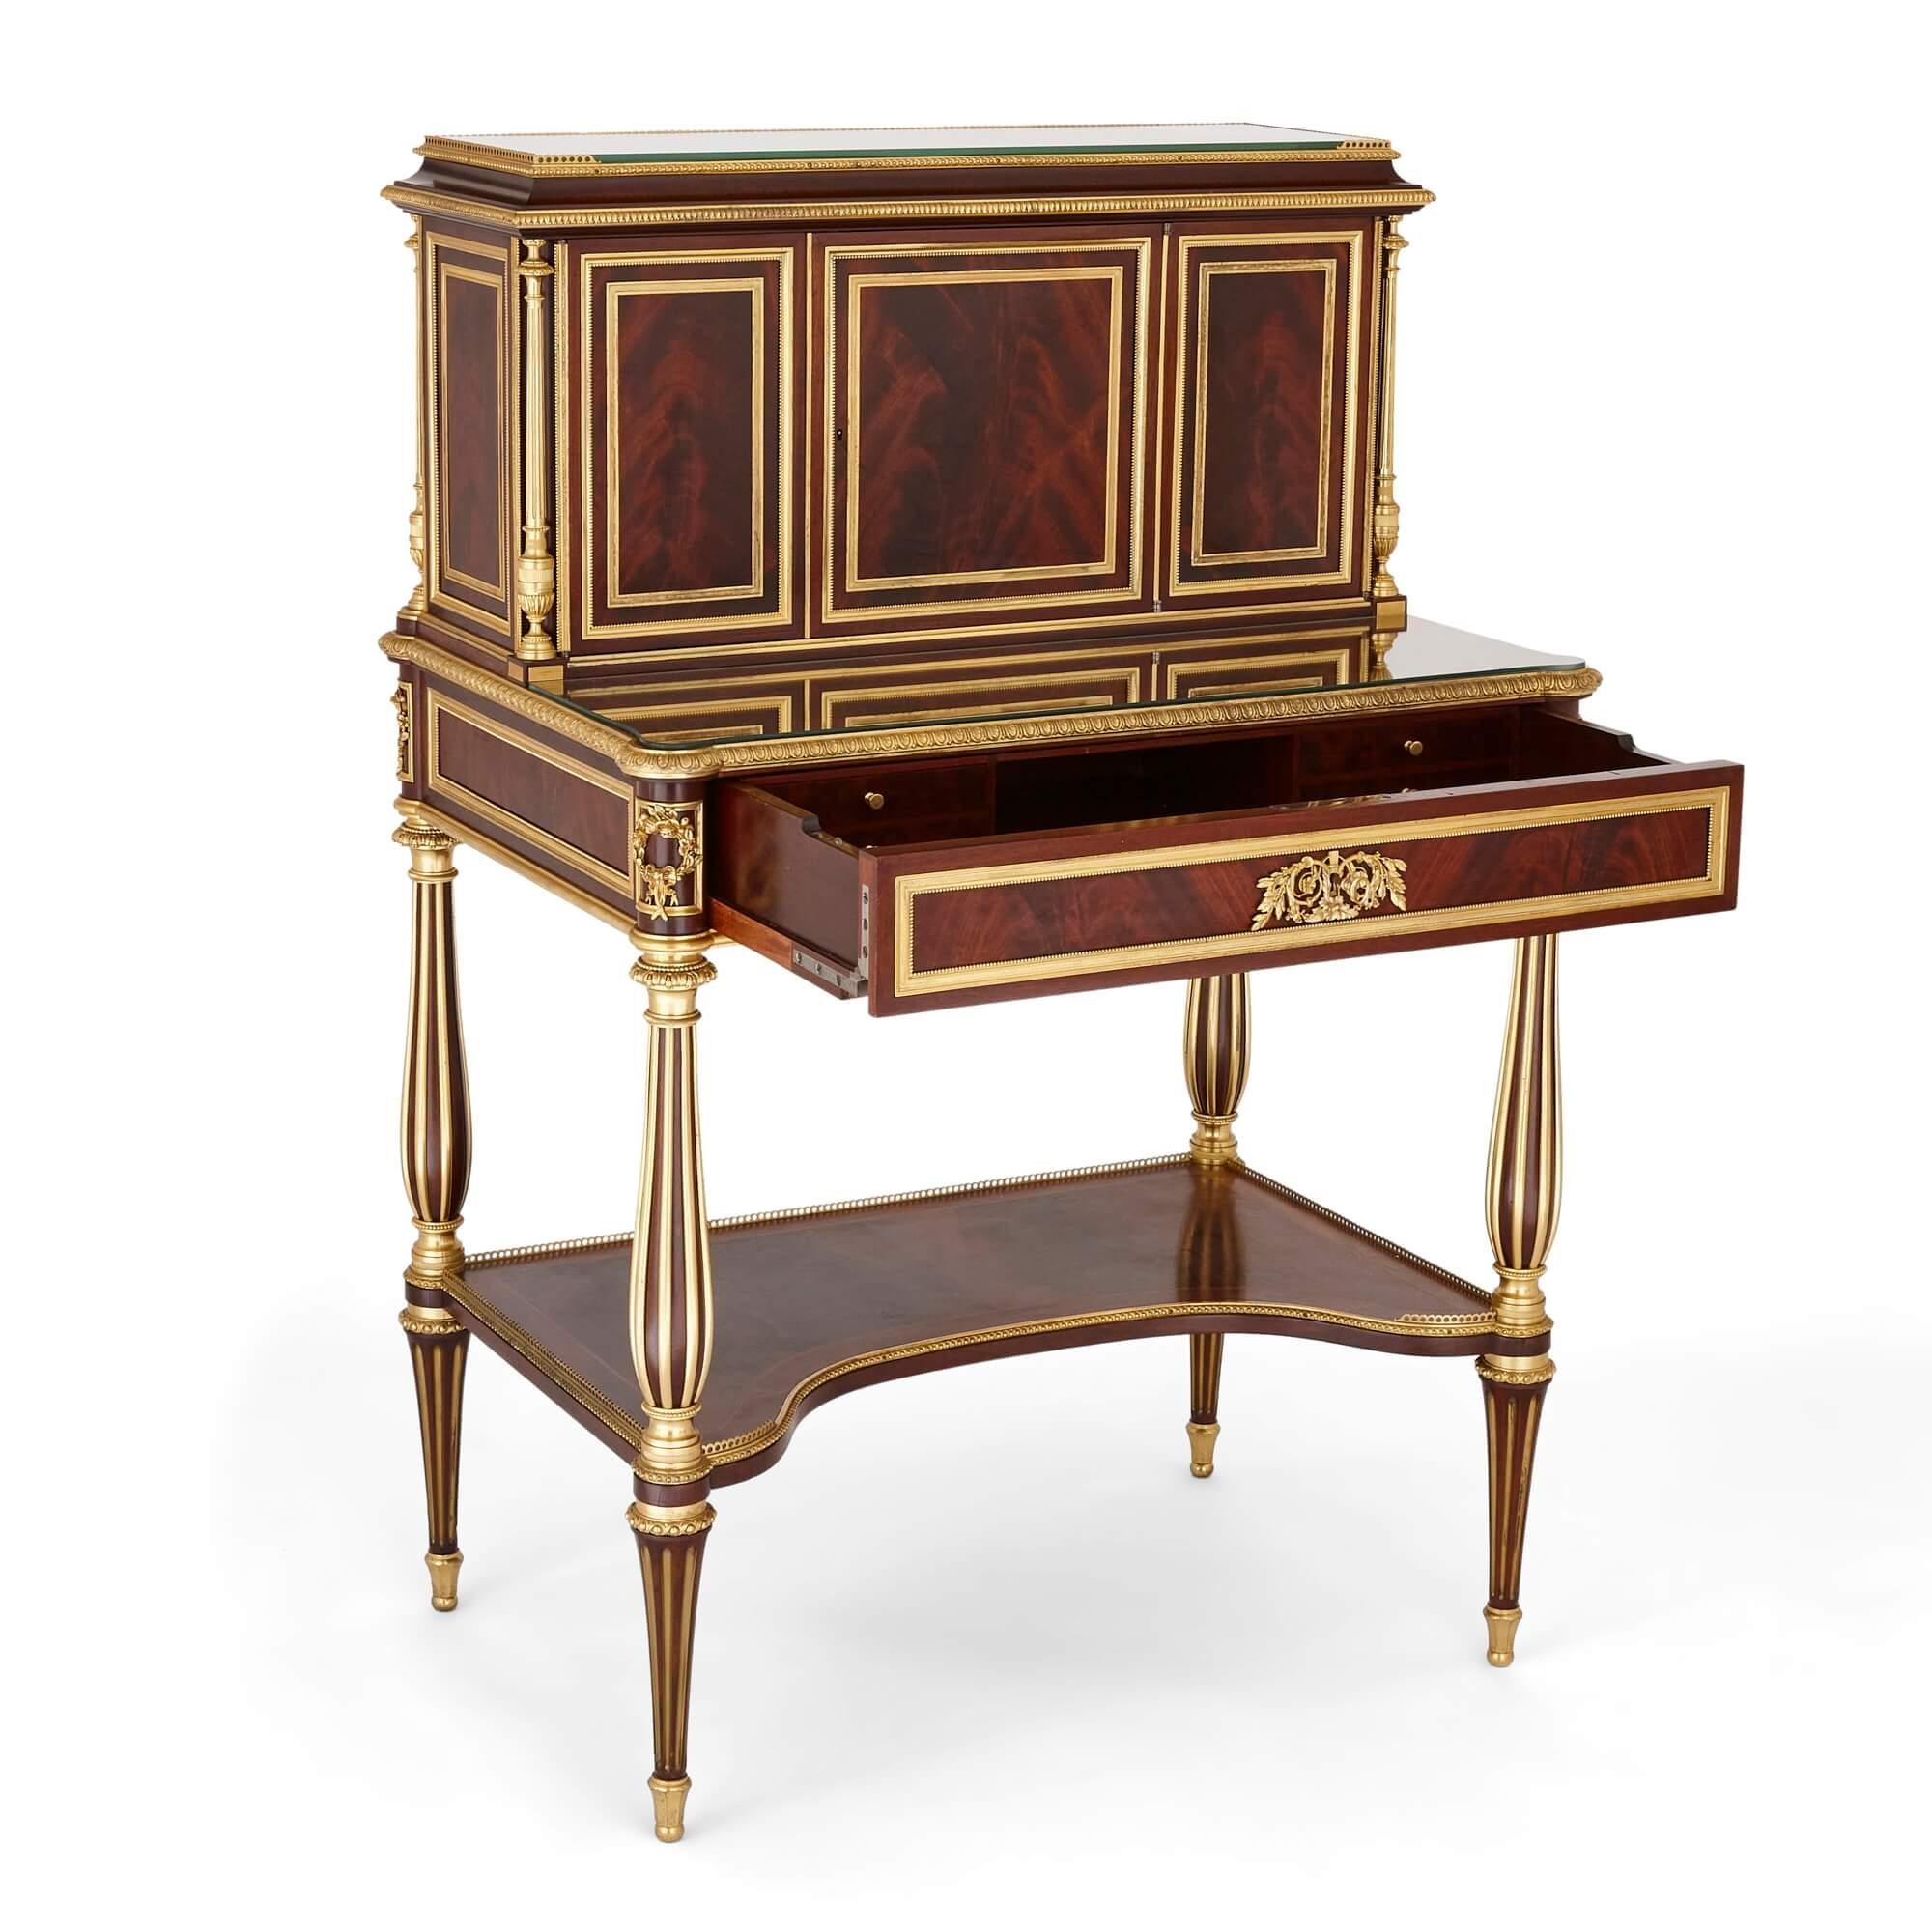 Antique French gilt bronze and mahogany bonheur du jour 
French, Late 19th Century 
Height 117cm, width 78cm, depth 54cm

Made in France in the late 19th century, this elegant bonheur du jour is made from a selection of high quality materials. This